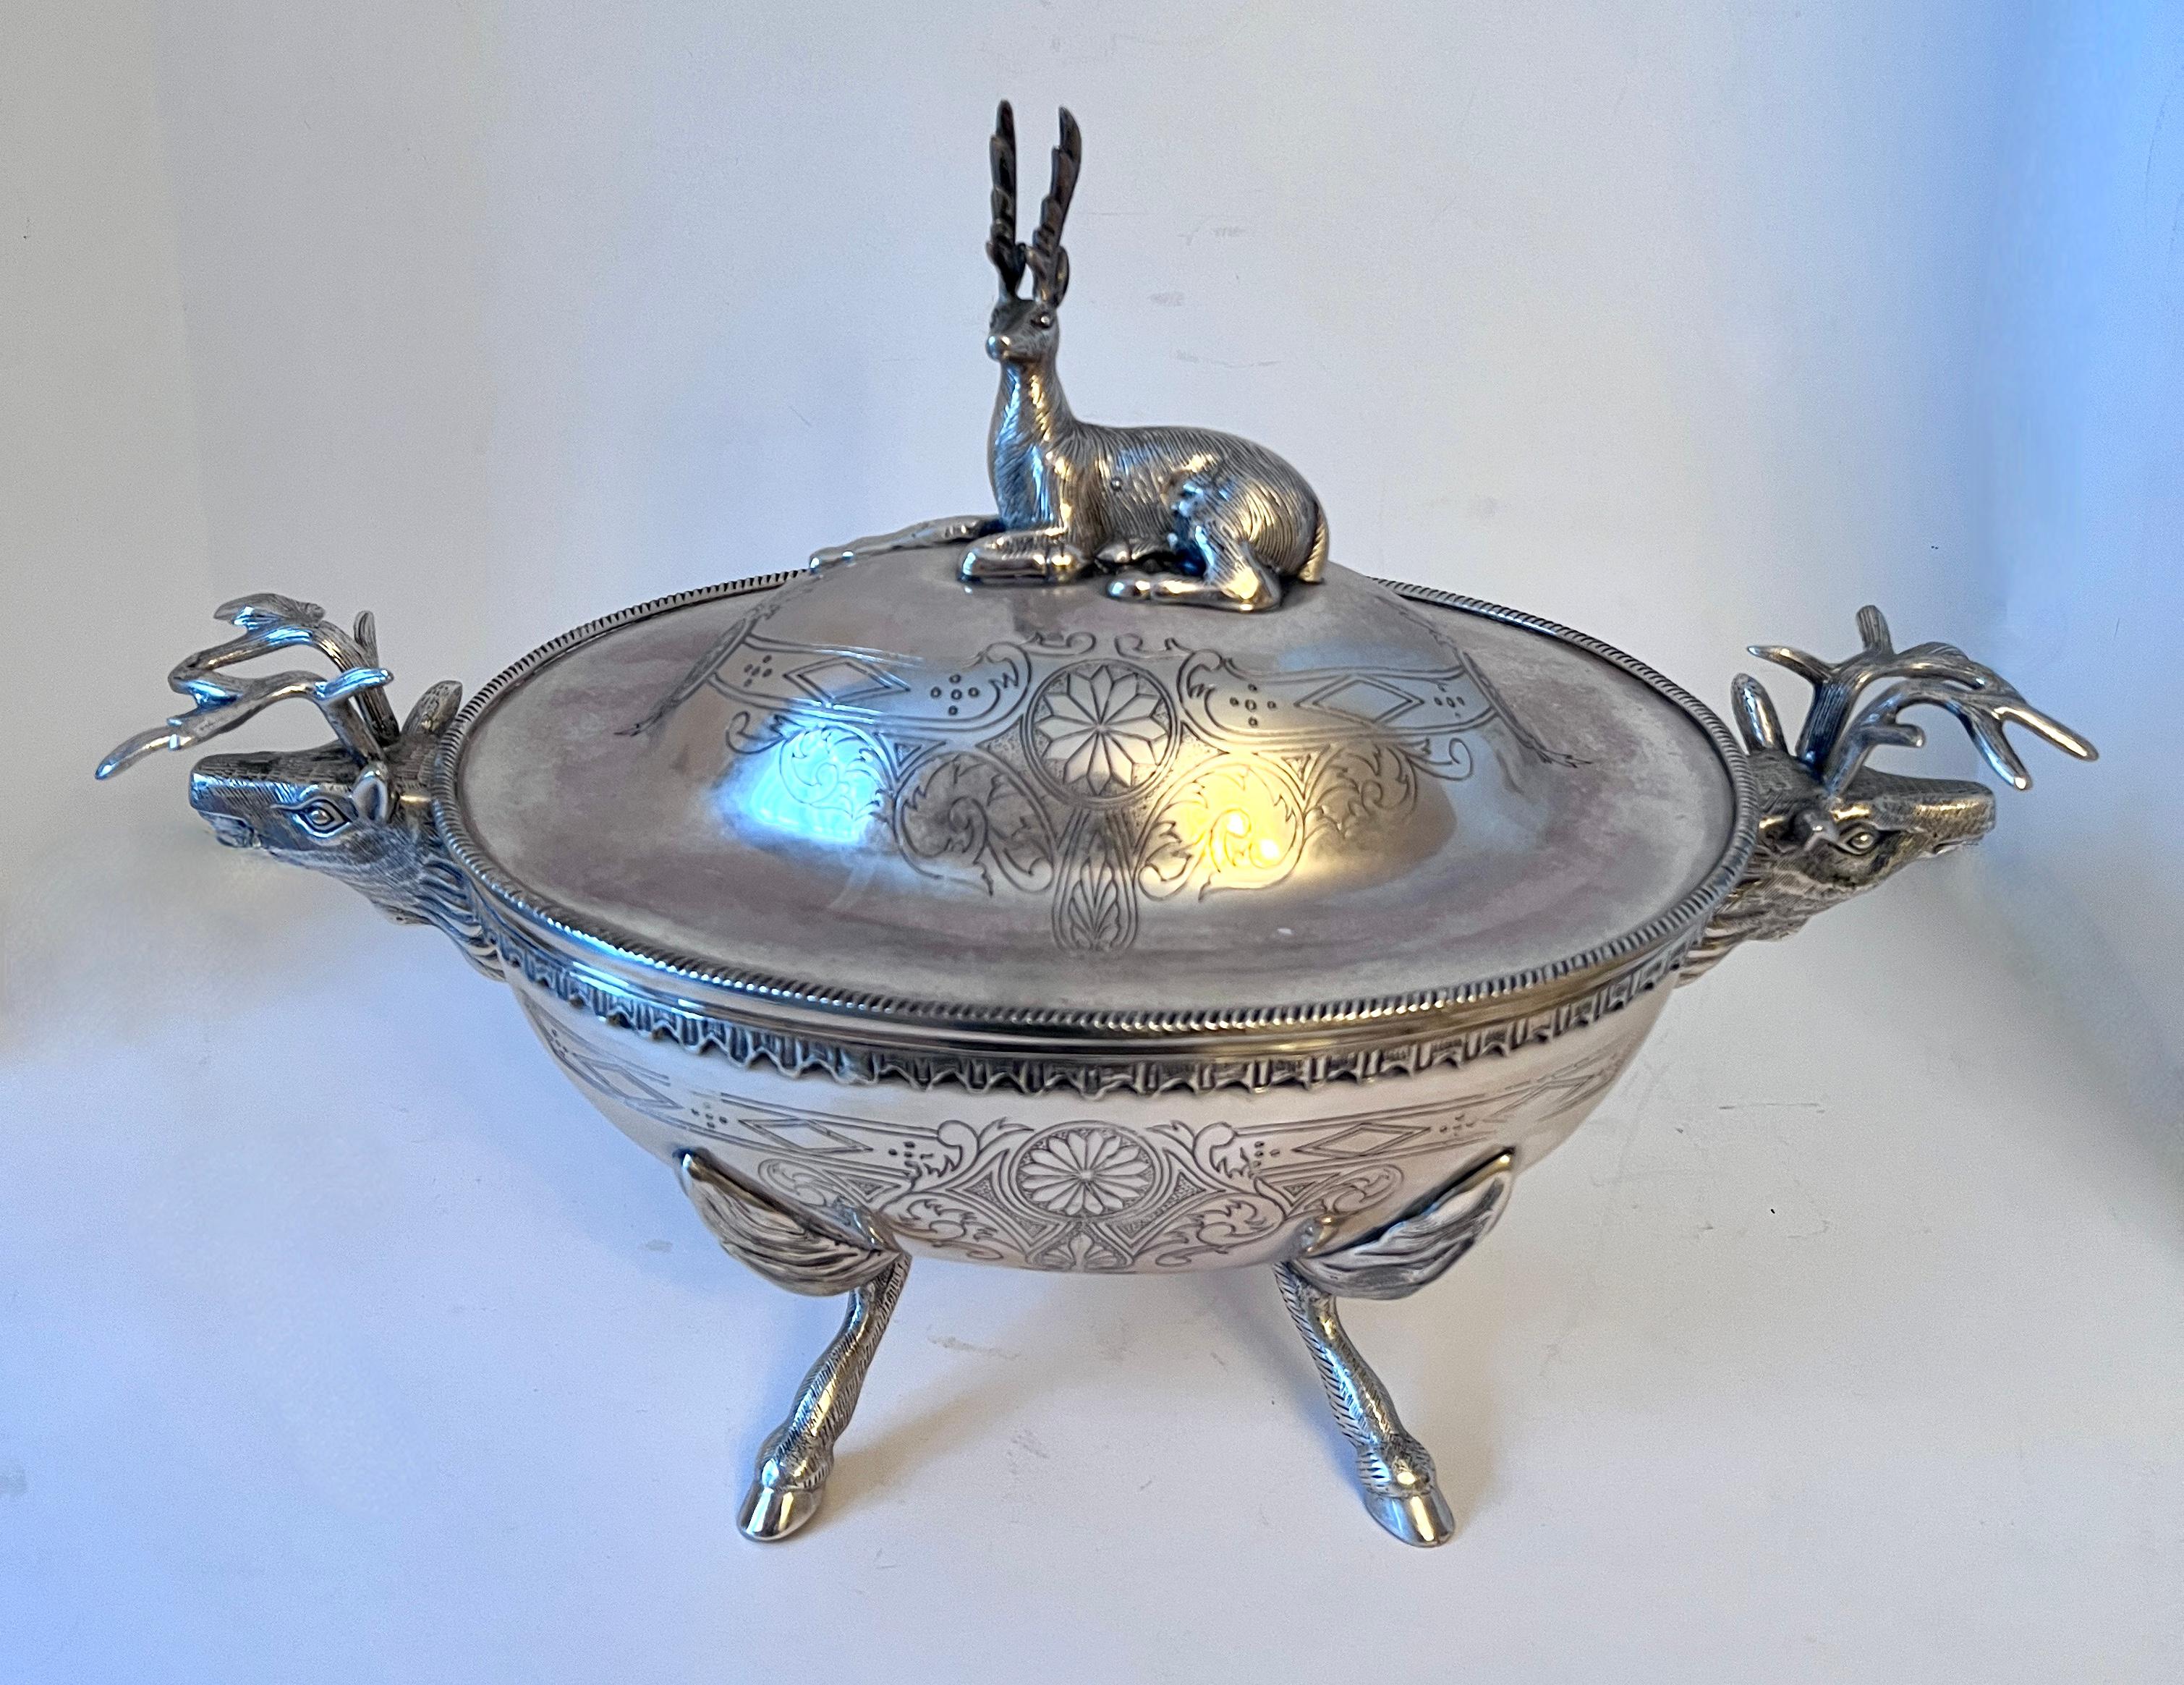 A Beautiful designed silver plate lidded Tureen.  The Stag theme is carried throughout, in the handles, lid and also the unique use of feet with hooves. 

A wonderful centerpiece which can also hold cooked foods or other thing such as fruits,